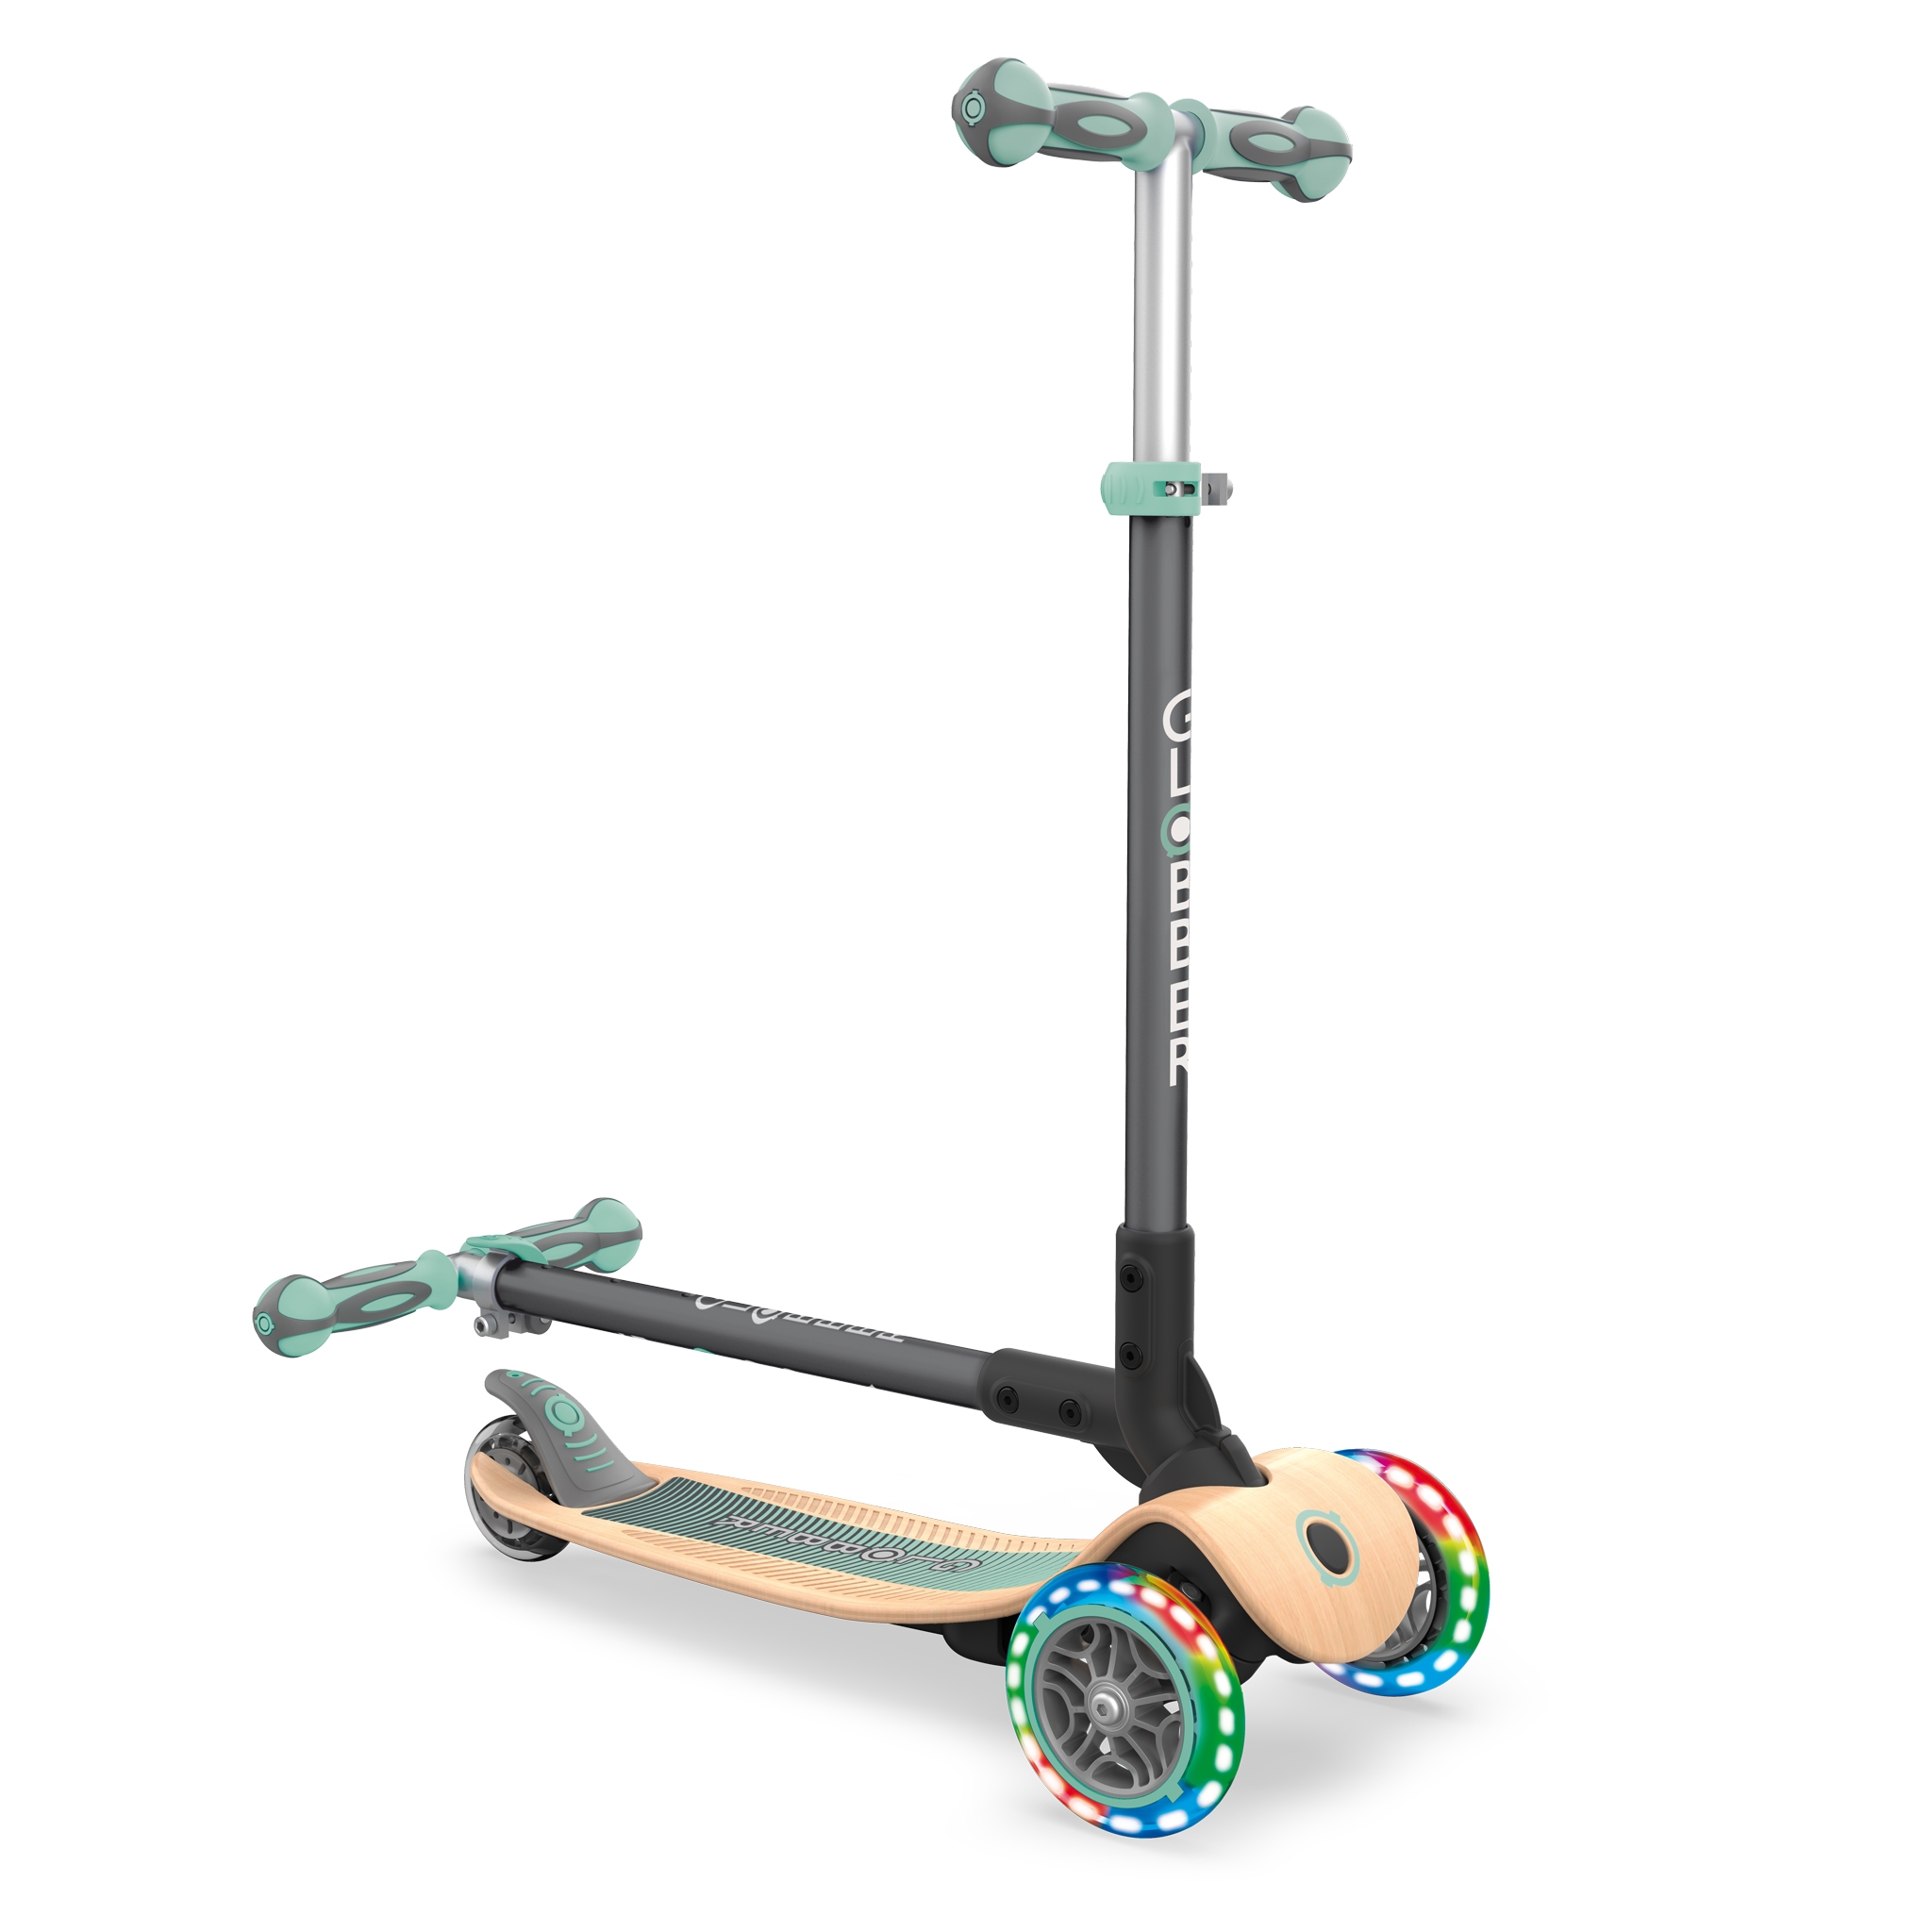 PRIMO-FOLDABLE-WOOD-LIGHTS-3-wheel-foldable-scooter-with-7-ply-wooden-scooter-deck-and-battery-free-light-up-wheels_pastel-green 2